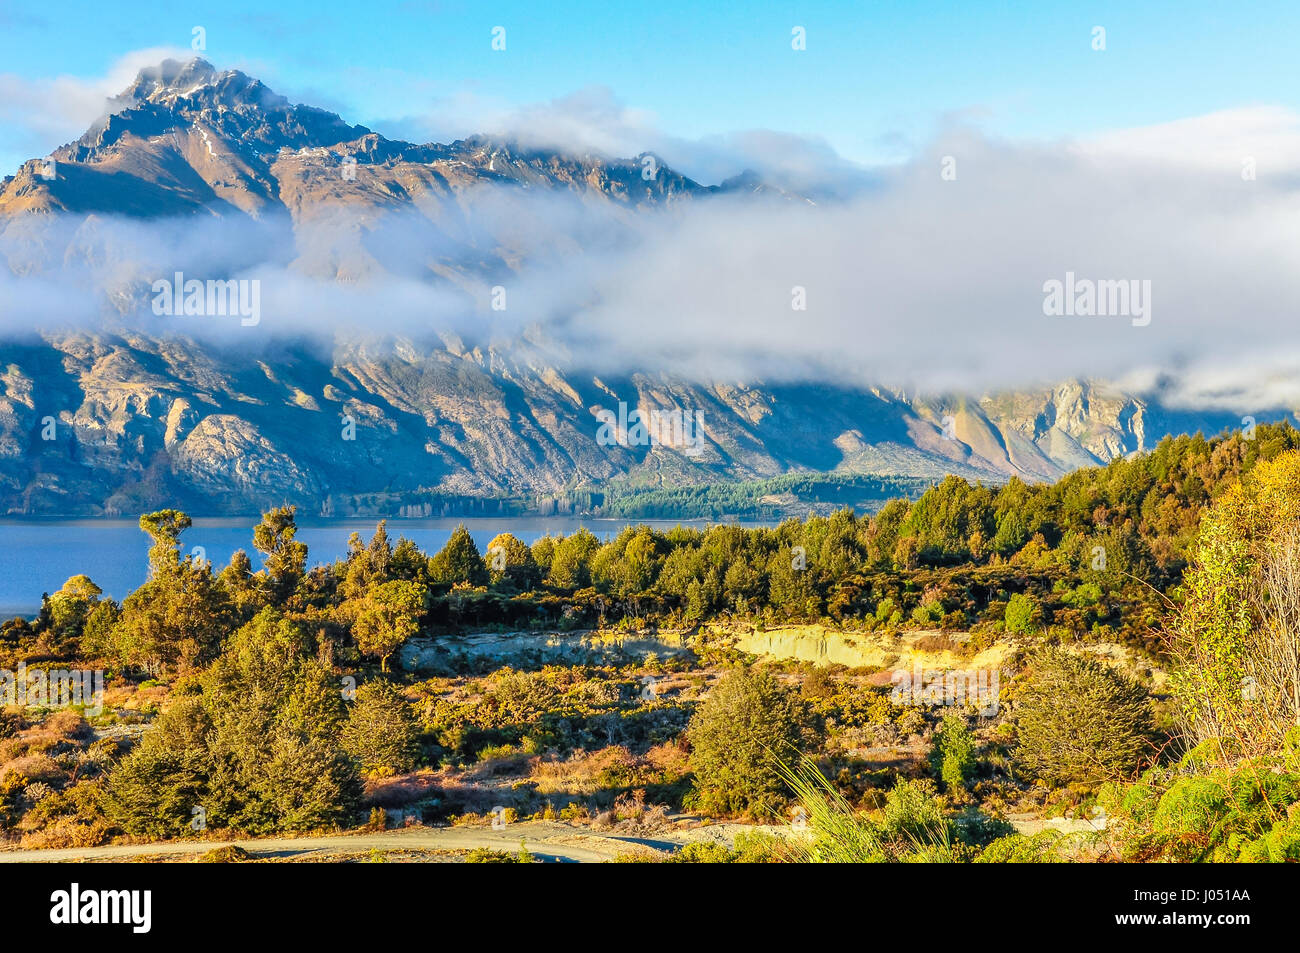 Low clouds in the mountains in Lord of the Rings film location, Glenorchy, New Zealand Stock Photo